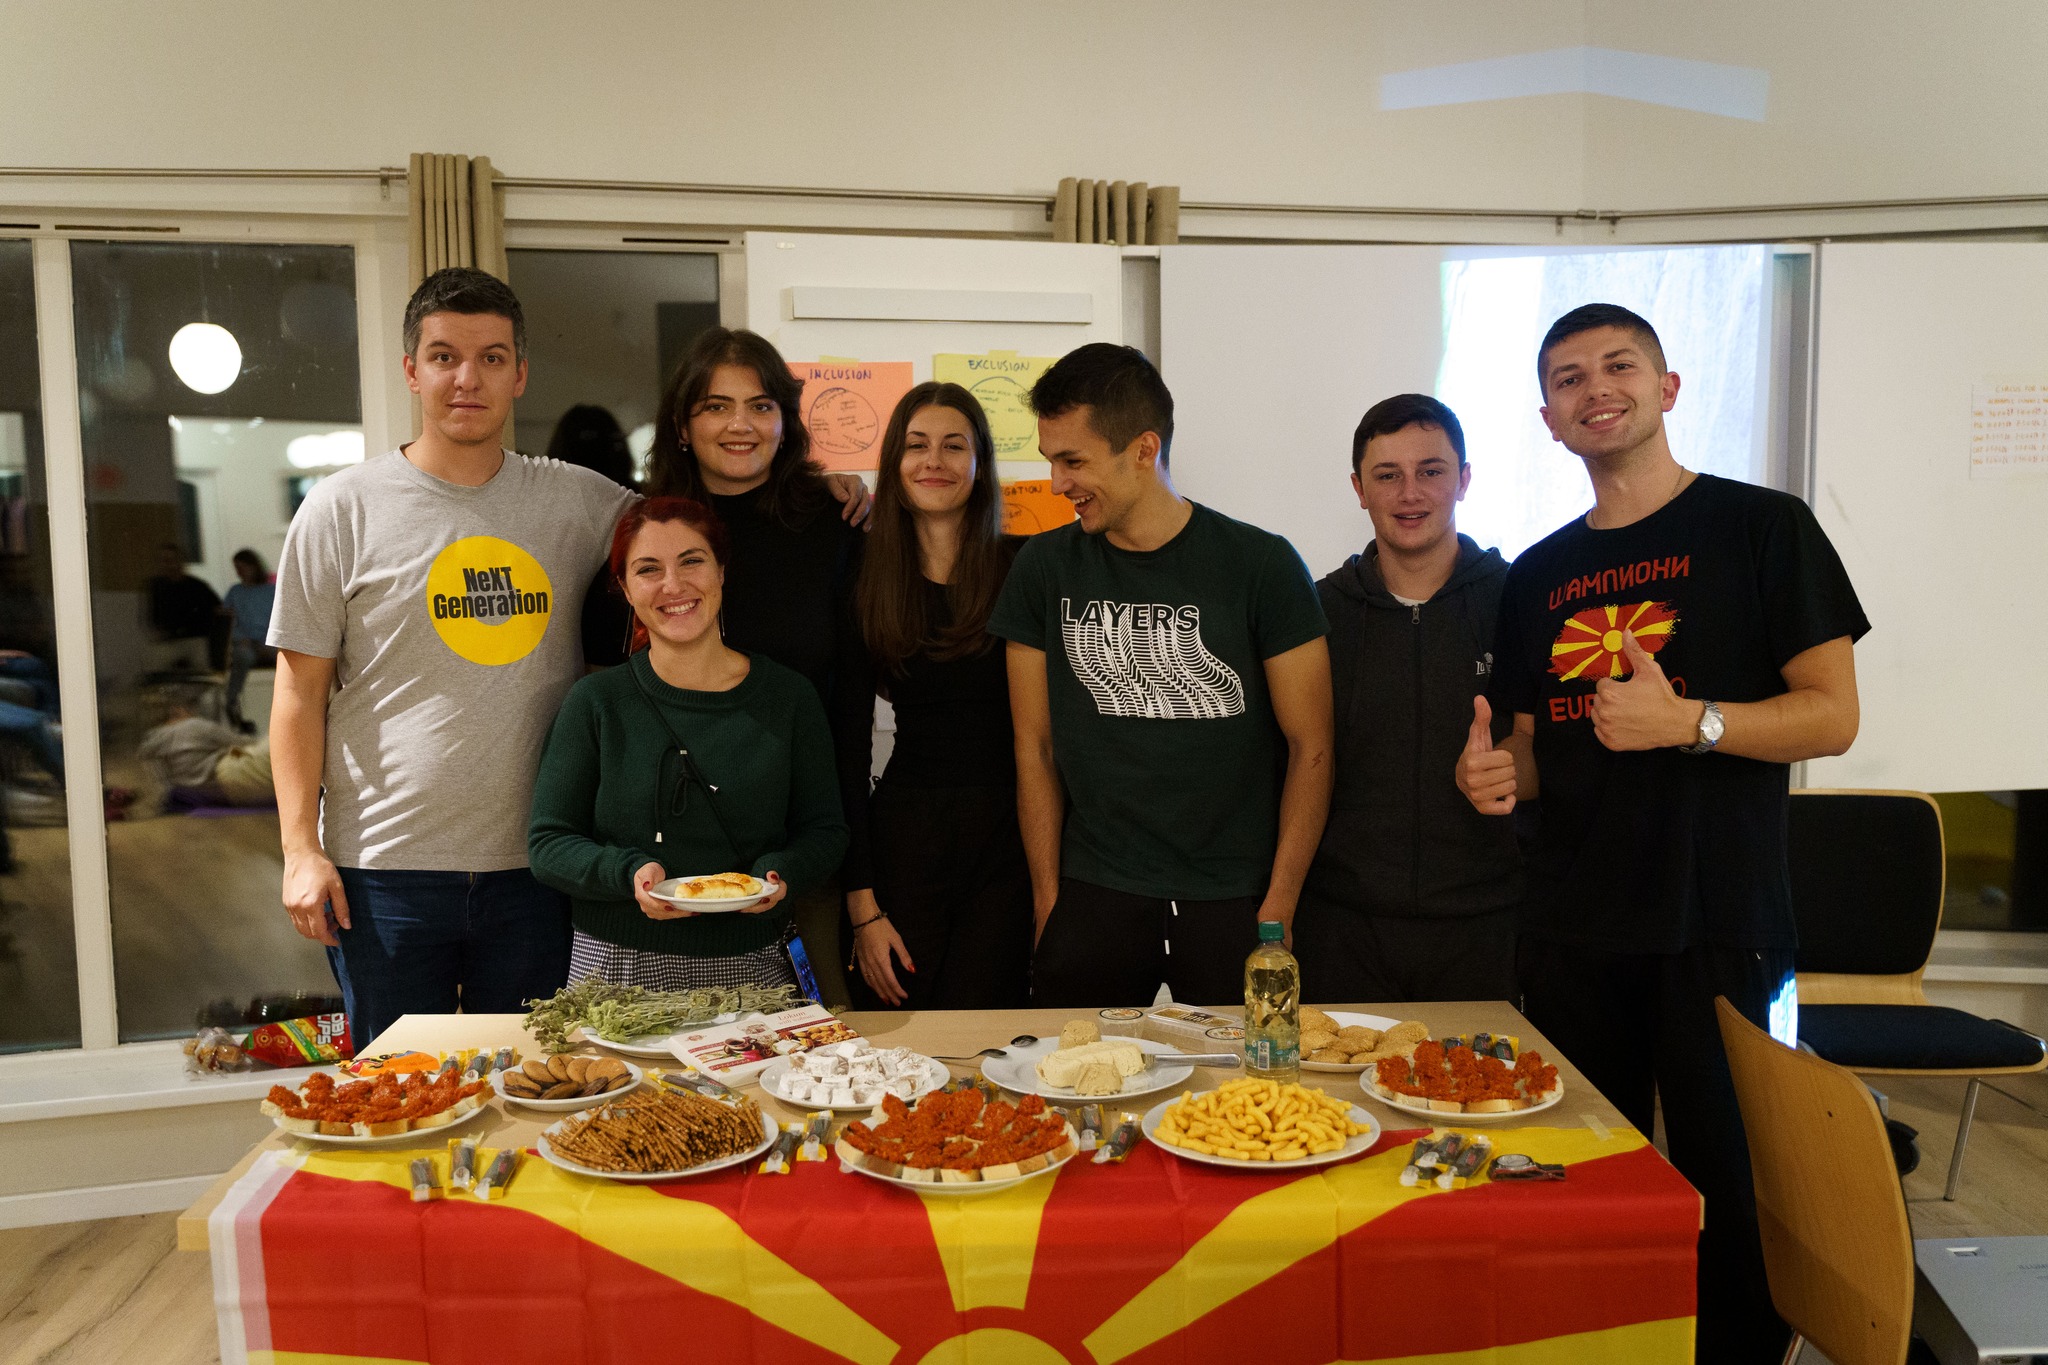 A group of people in presenting Macedonian food